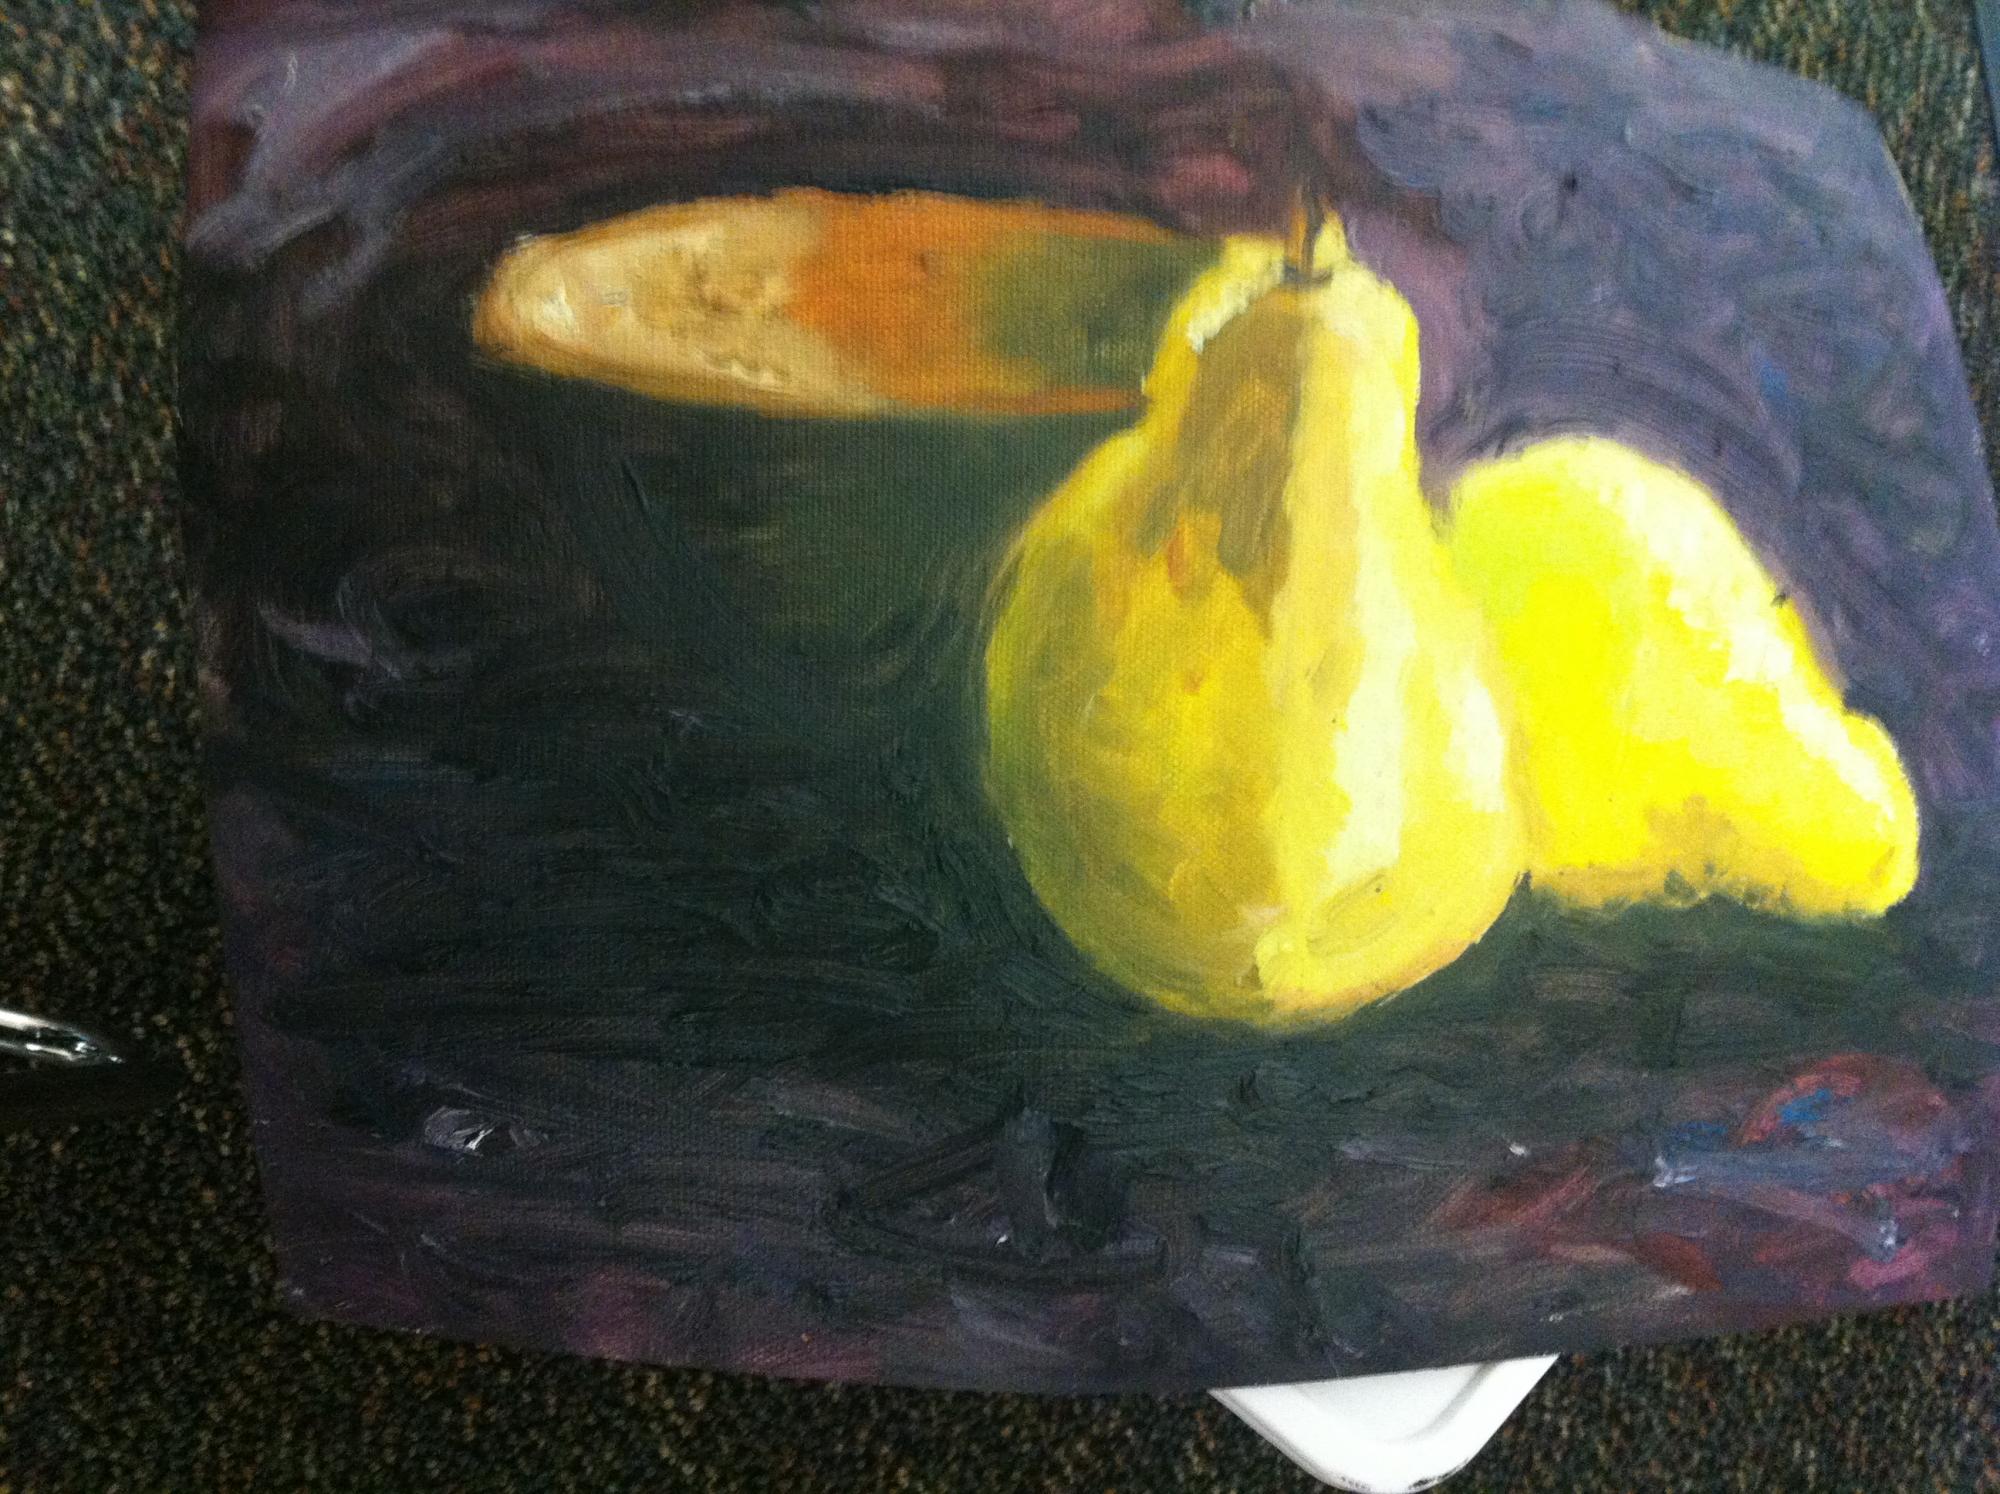 A oil painting I did in like 30 minutes (just some practice stuff)